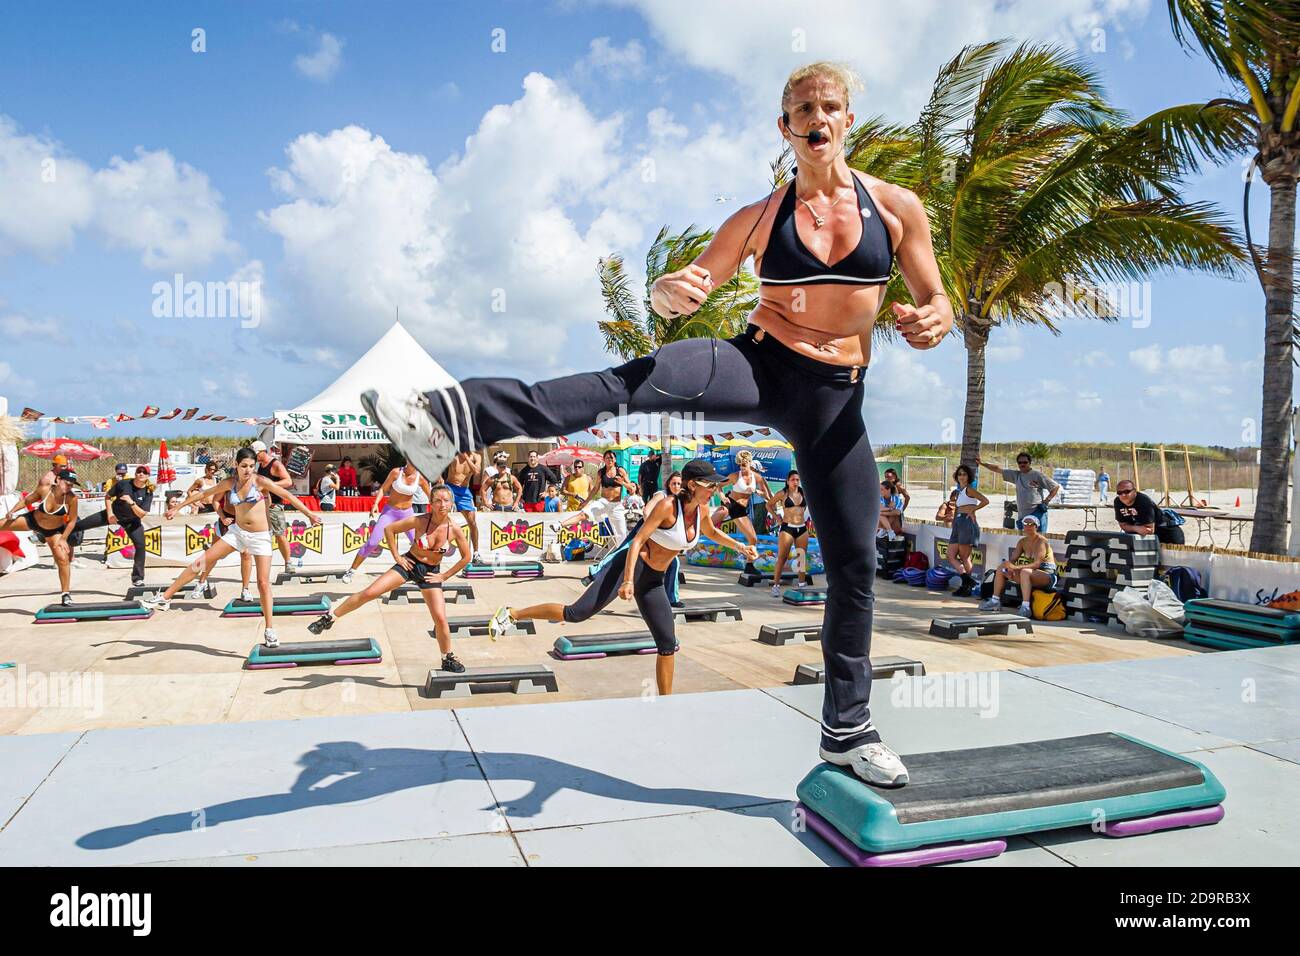 Miami Beach Florida,Ocean Drive,Lummus Park,Fitness Festival exercise class workout woman female fit instructor leading, Stock Photo